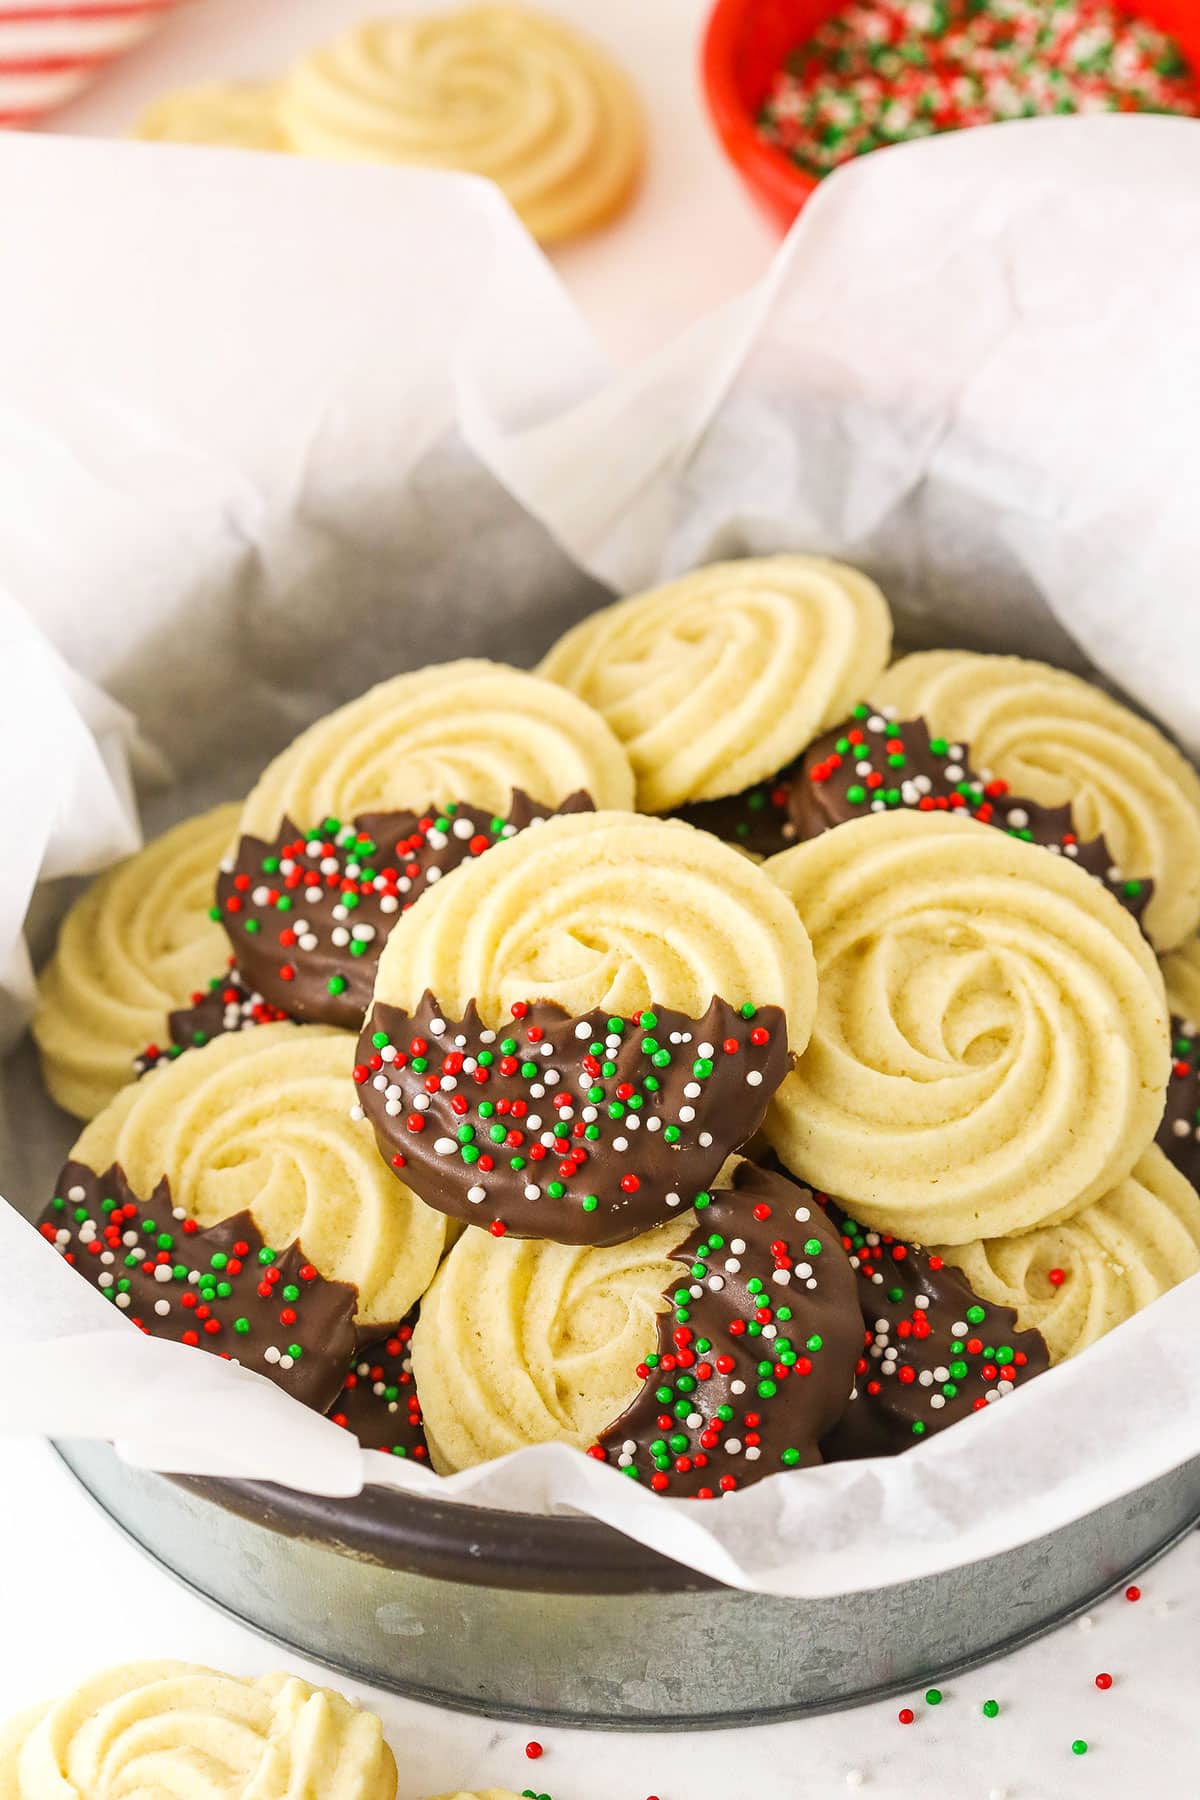 Chocolate dipped butter cookies in a metal serving dish.